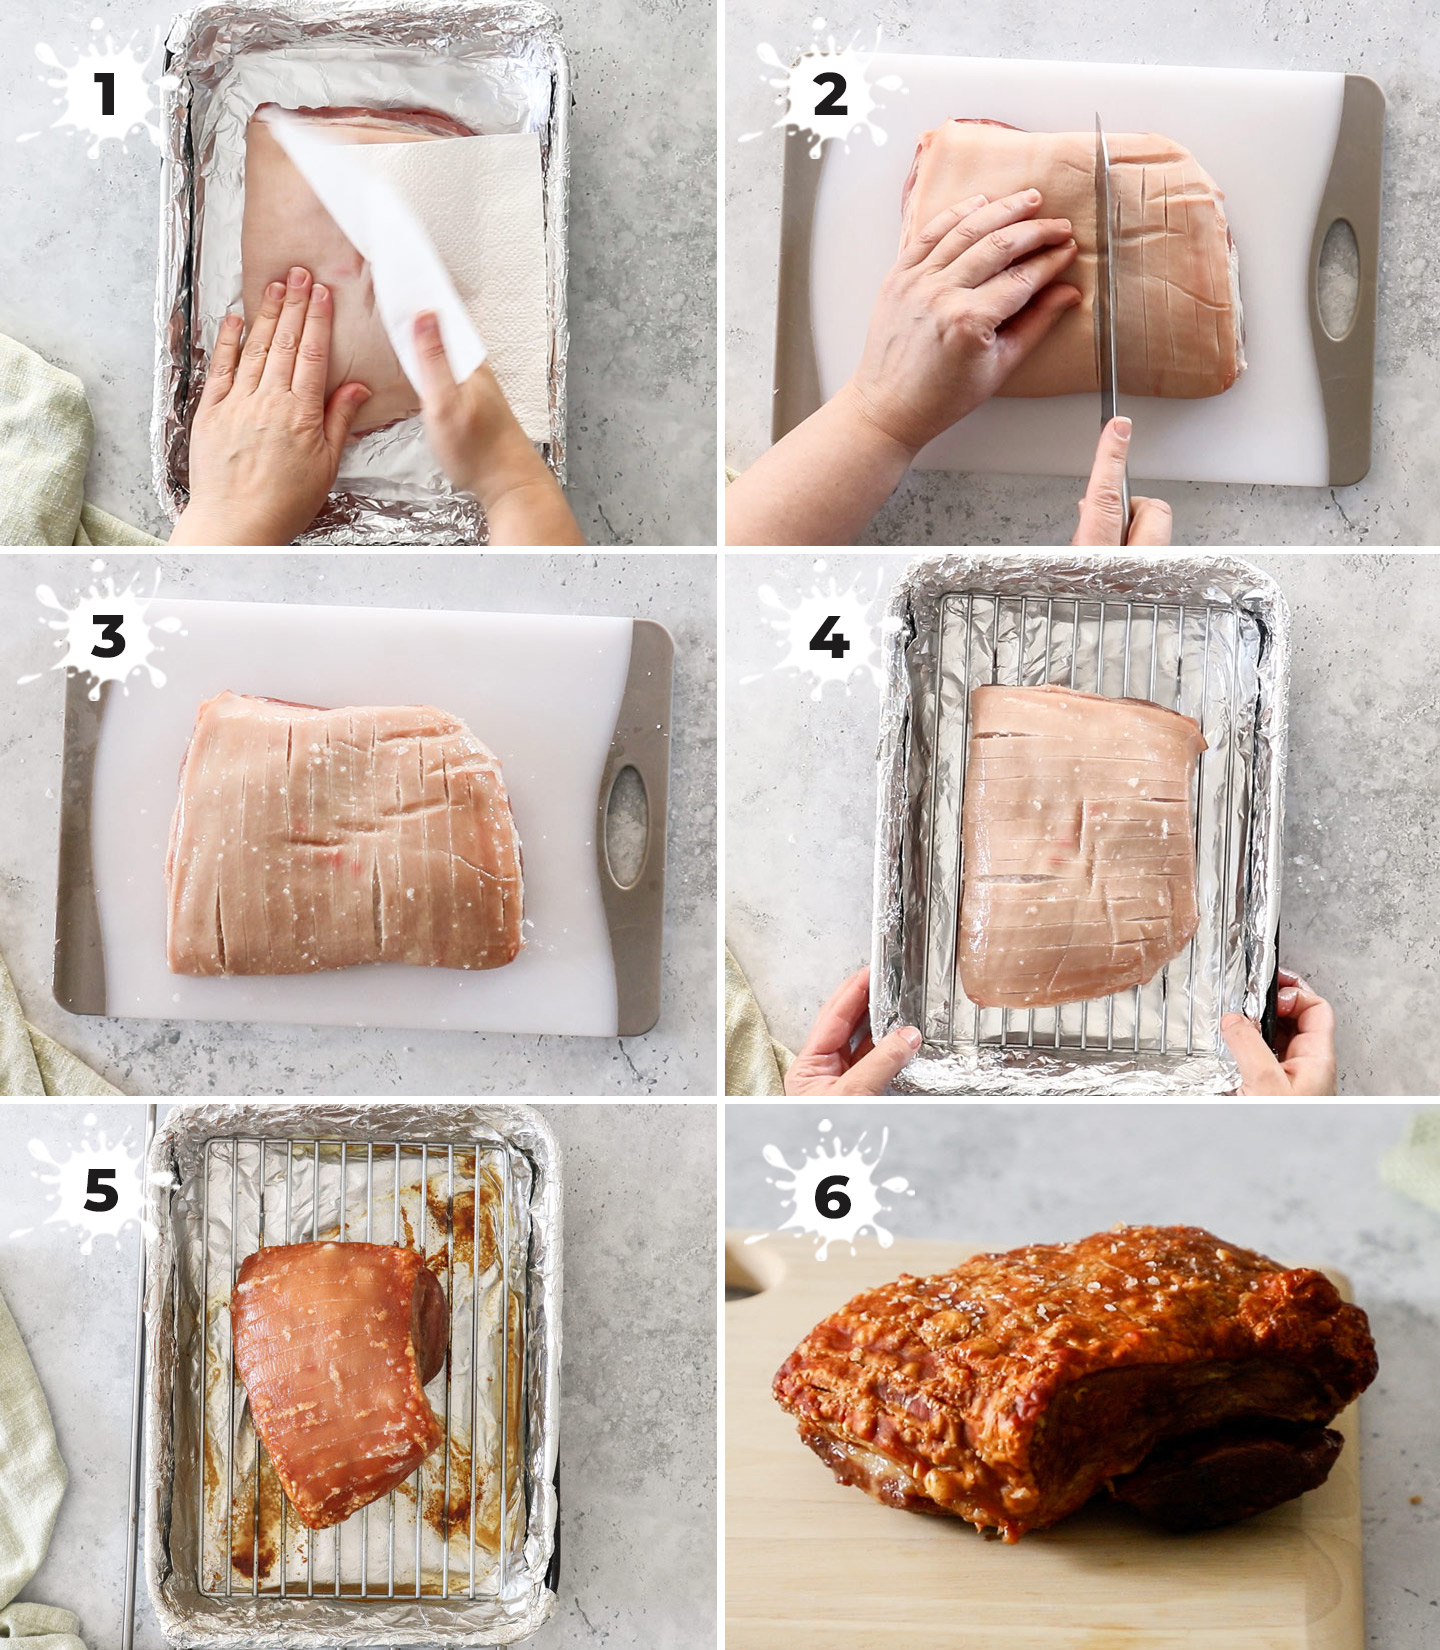 A collage showing how to make roasted pork belly.